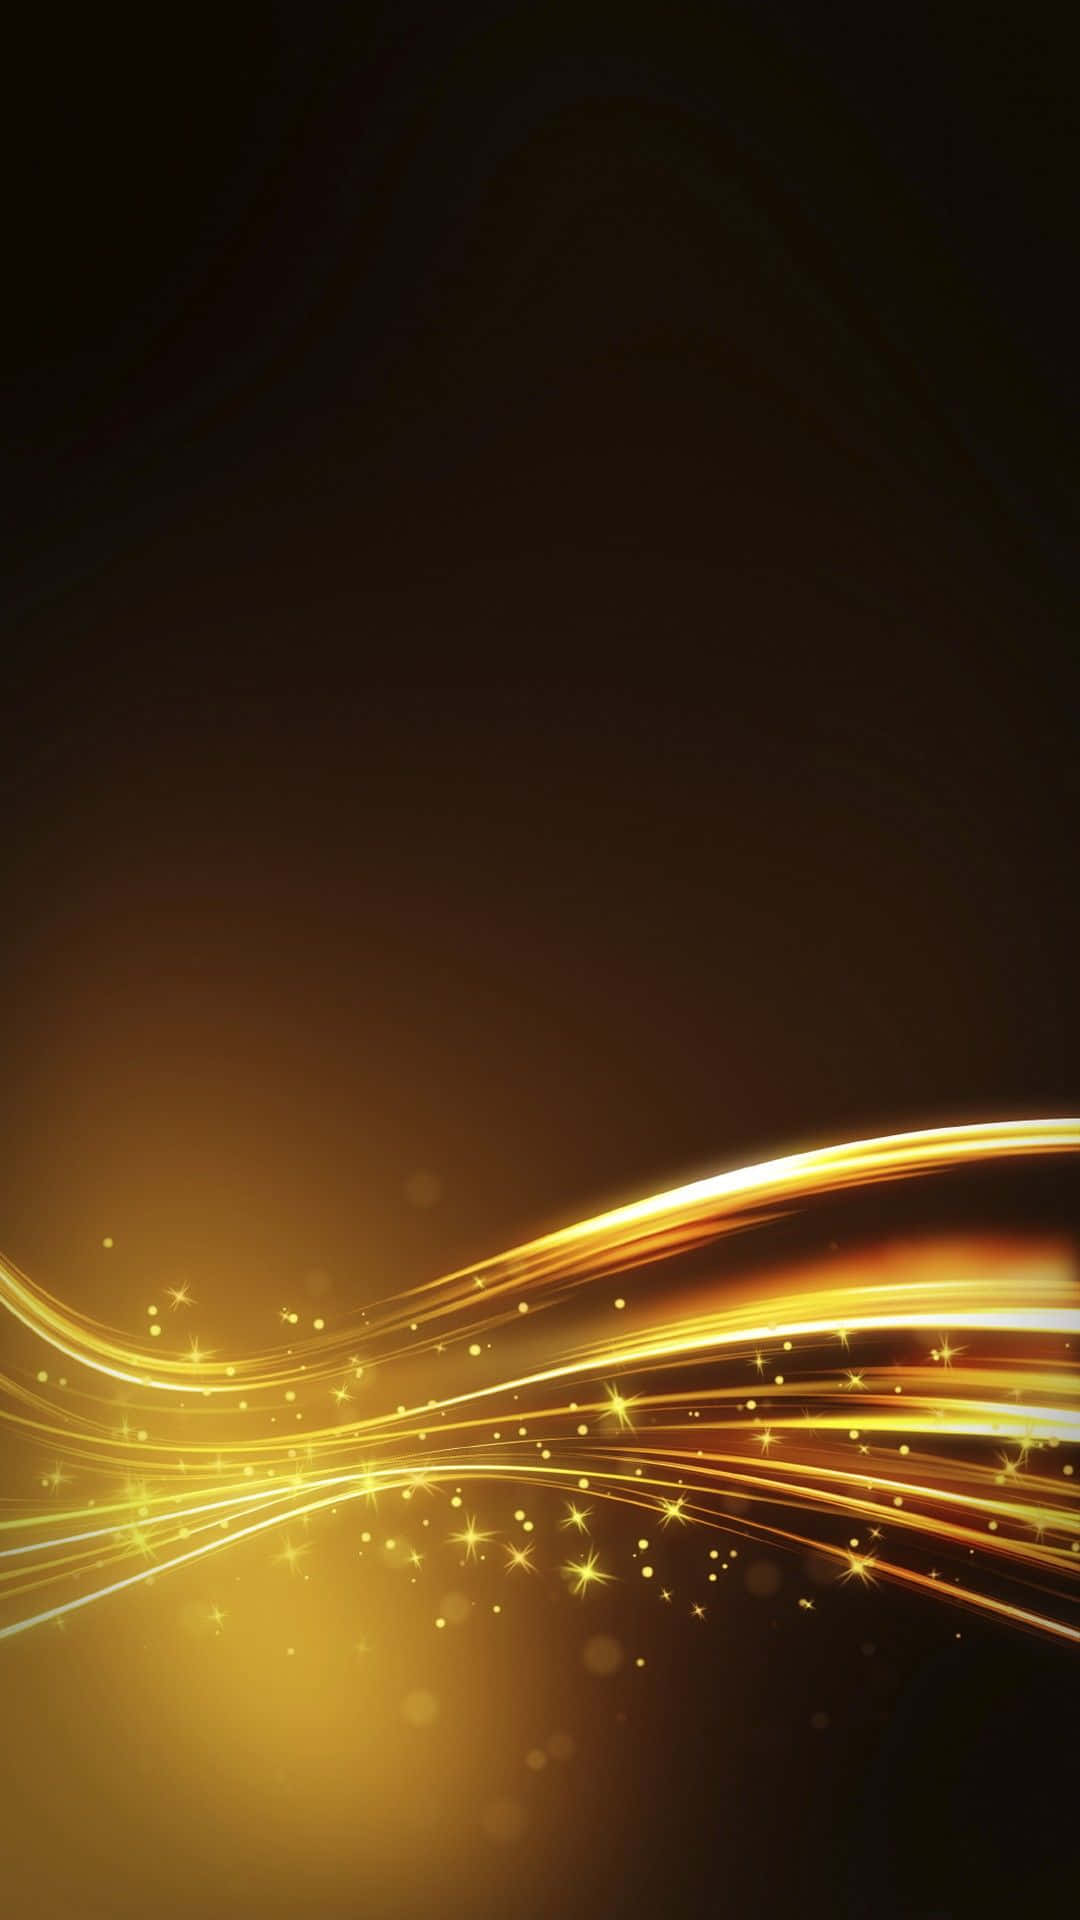 Golden Wave Background With Stars